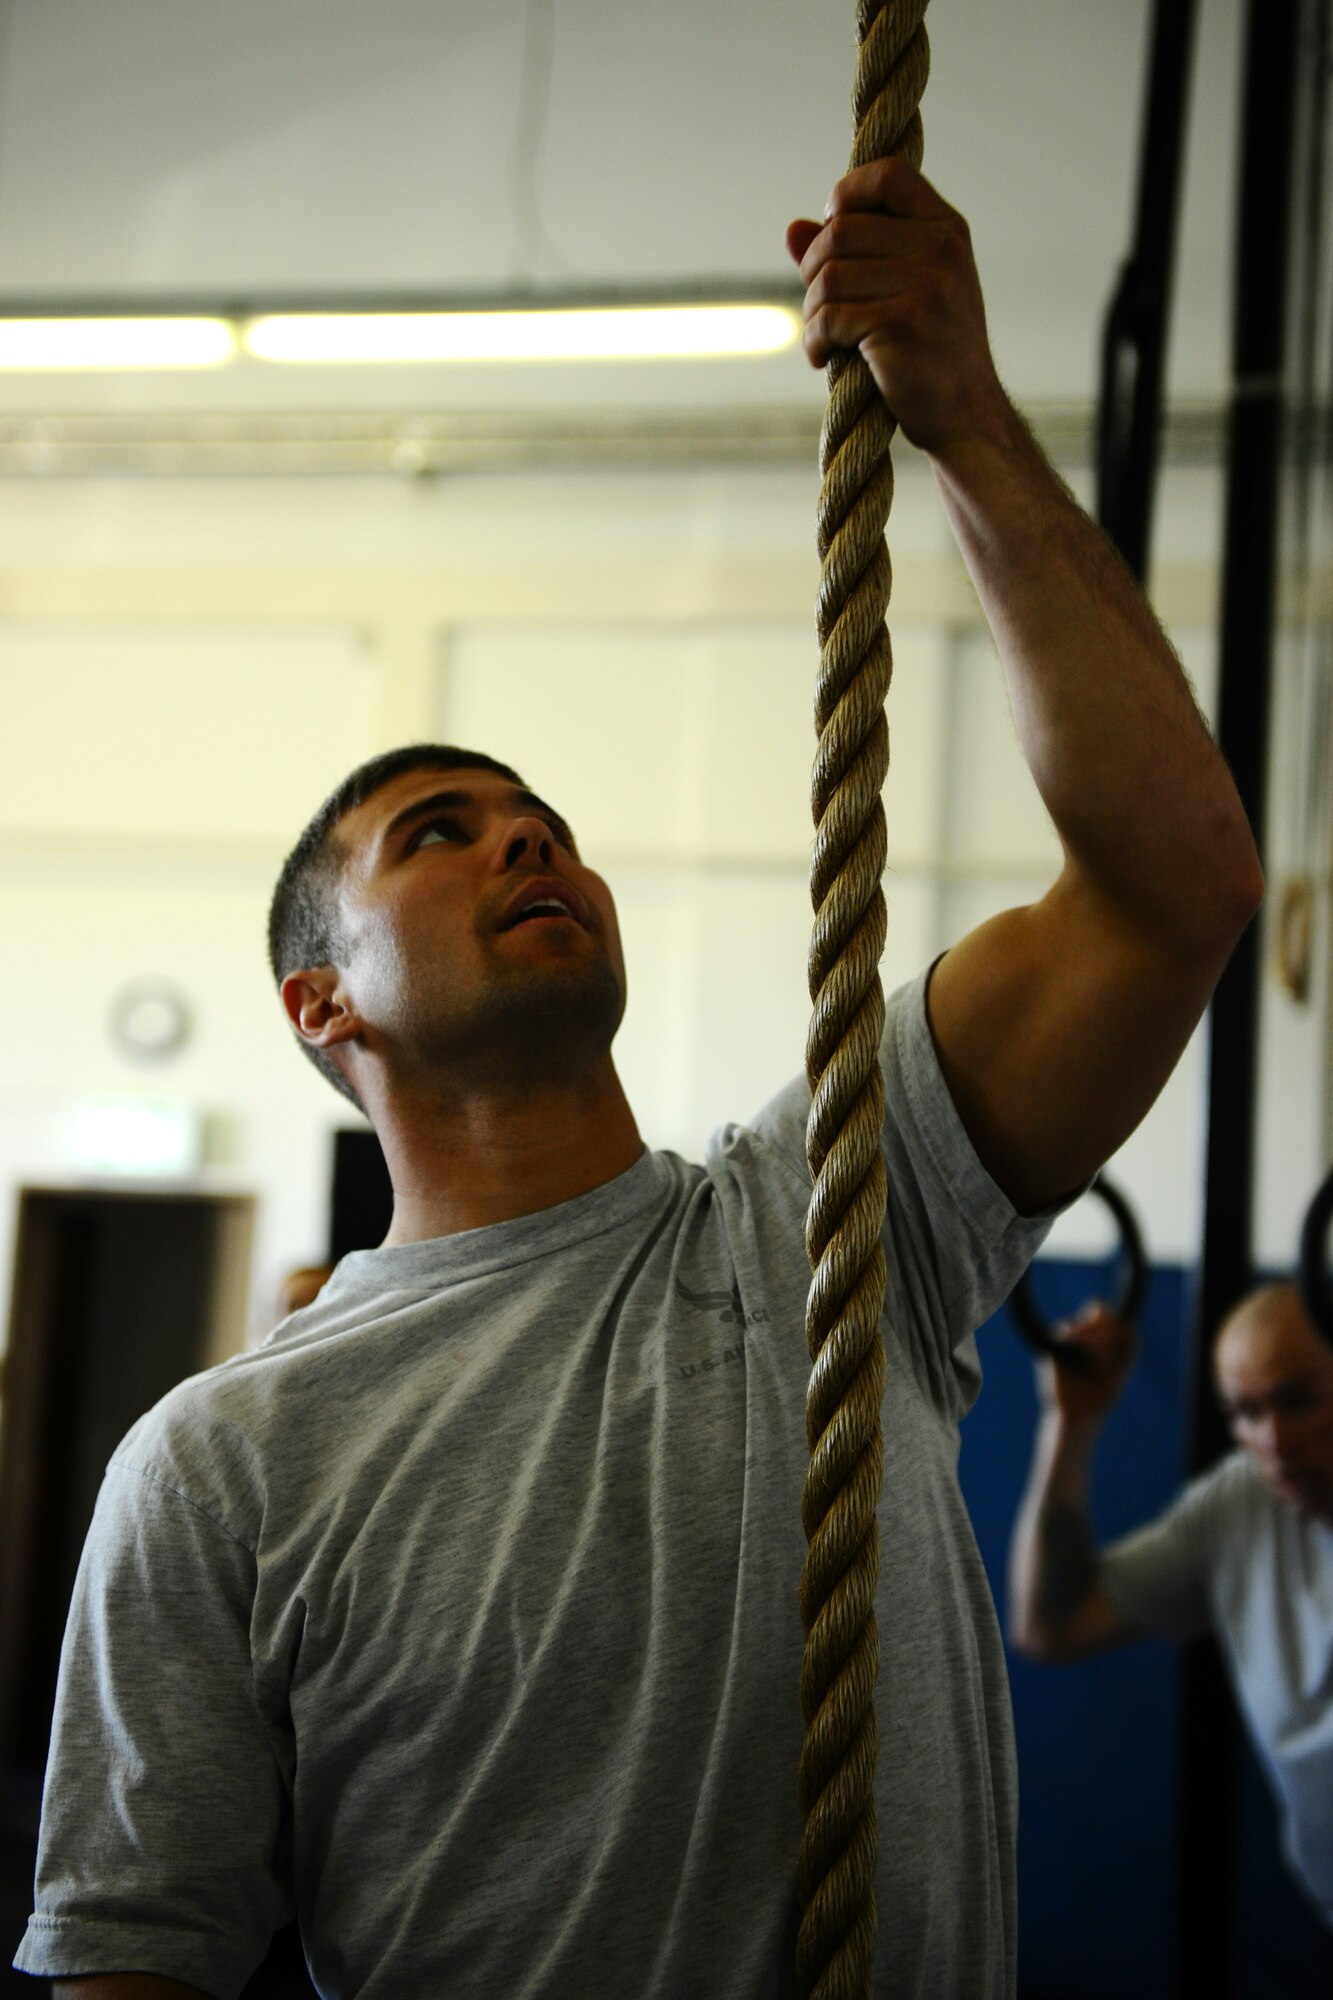 SPANGDAHLEM AIR BASE, Germany – Airman 1st Class Andrew Herget, 52nd Civil Engineer Squadron, prepares to climb a rope during the Iron Flight Competition at the Combat Fitness Center here March 28. The quarterly competition is an incentive program intended to build comraderie and test the mental and physical endurance of the participating squadron members. Four teams participated in the six-person team competition that consisted of three different events. The 52nd Equipment Maintenance Squadron ammo team won the competition after a three-way tie-breaker rope-climbing event against the 52nd Civil Engineer Squadron and the 52nd Component Maintenace Squadron. (U.S. Air Force photo by Airman 1st Class Matthew B. Fredericks/Released)